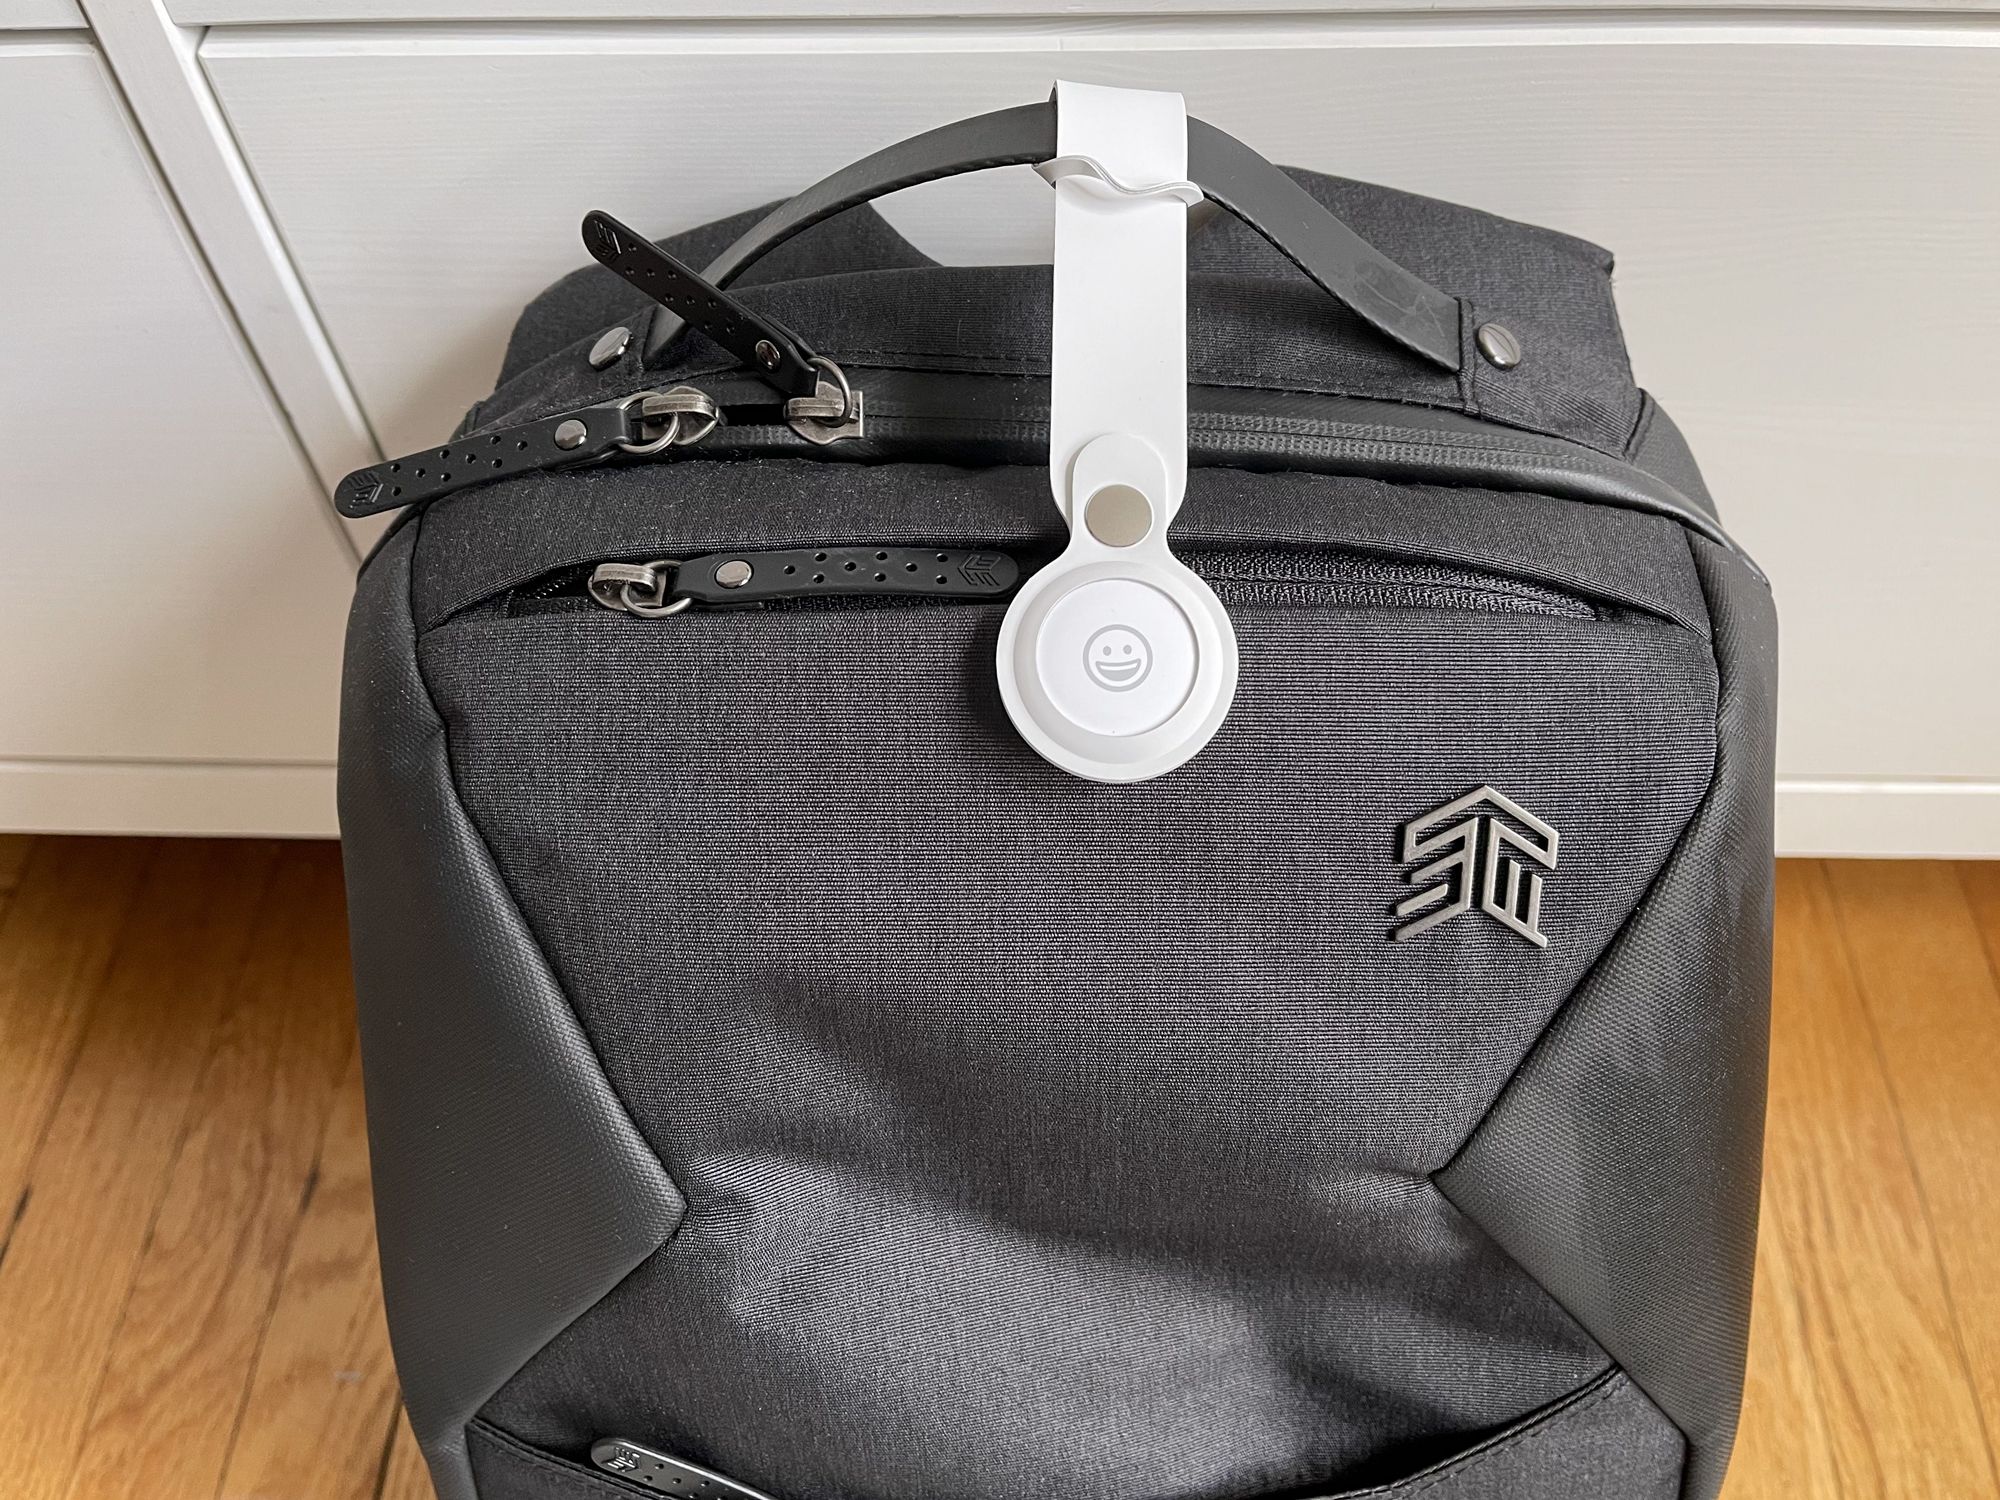 Travelers use AirTag to track lost luggage all the way to the